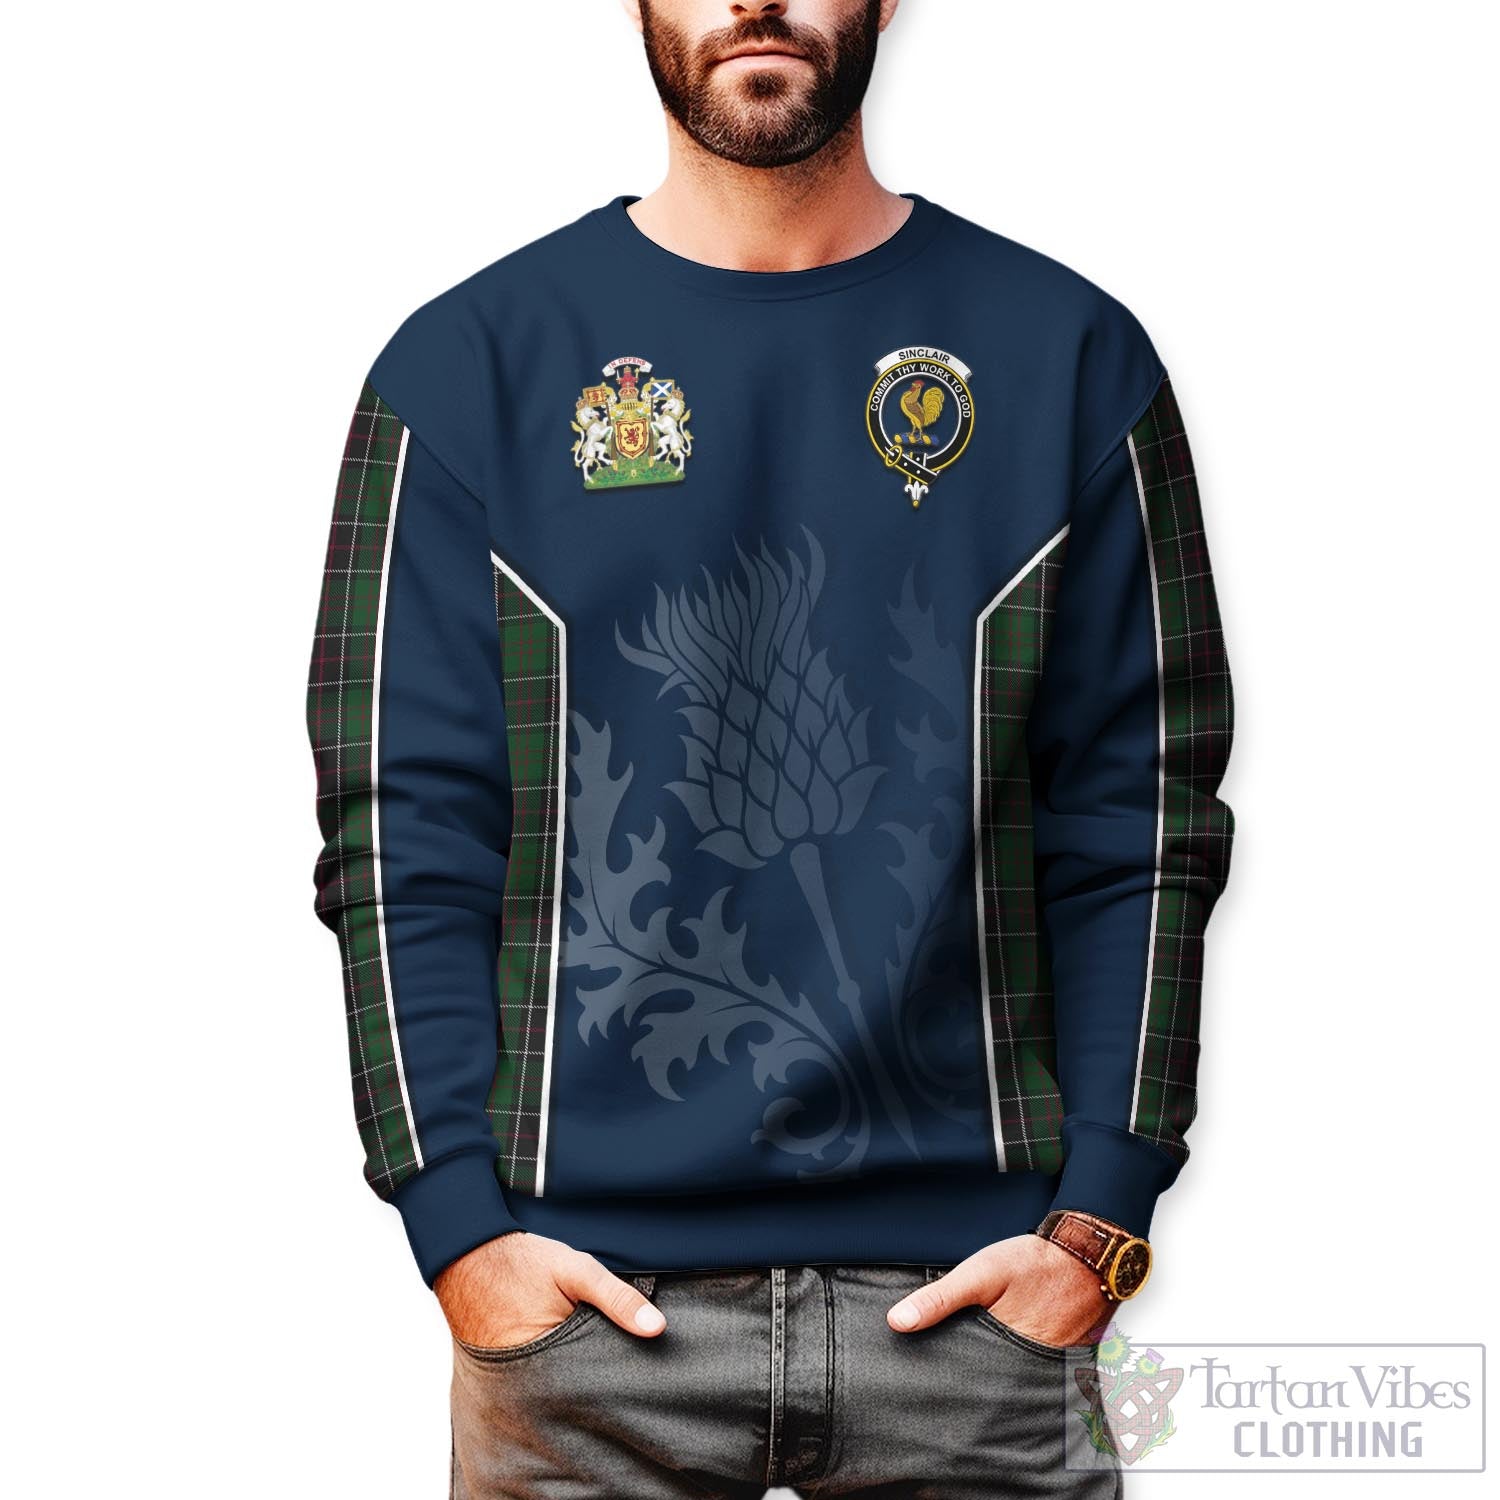 Tartan Vibes Clothing Sinclair Hunting Tartan Sweatshirt with Family Crest and Scottish Thistle Vibes Sport Style